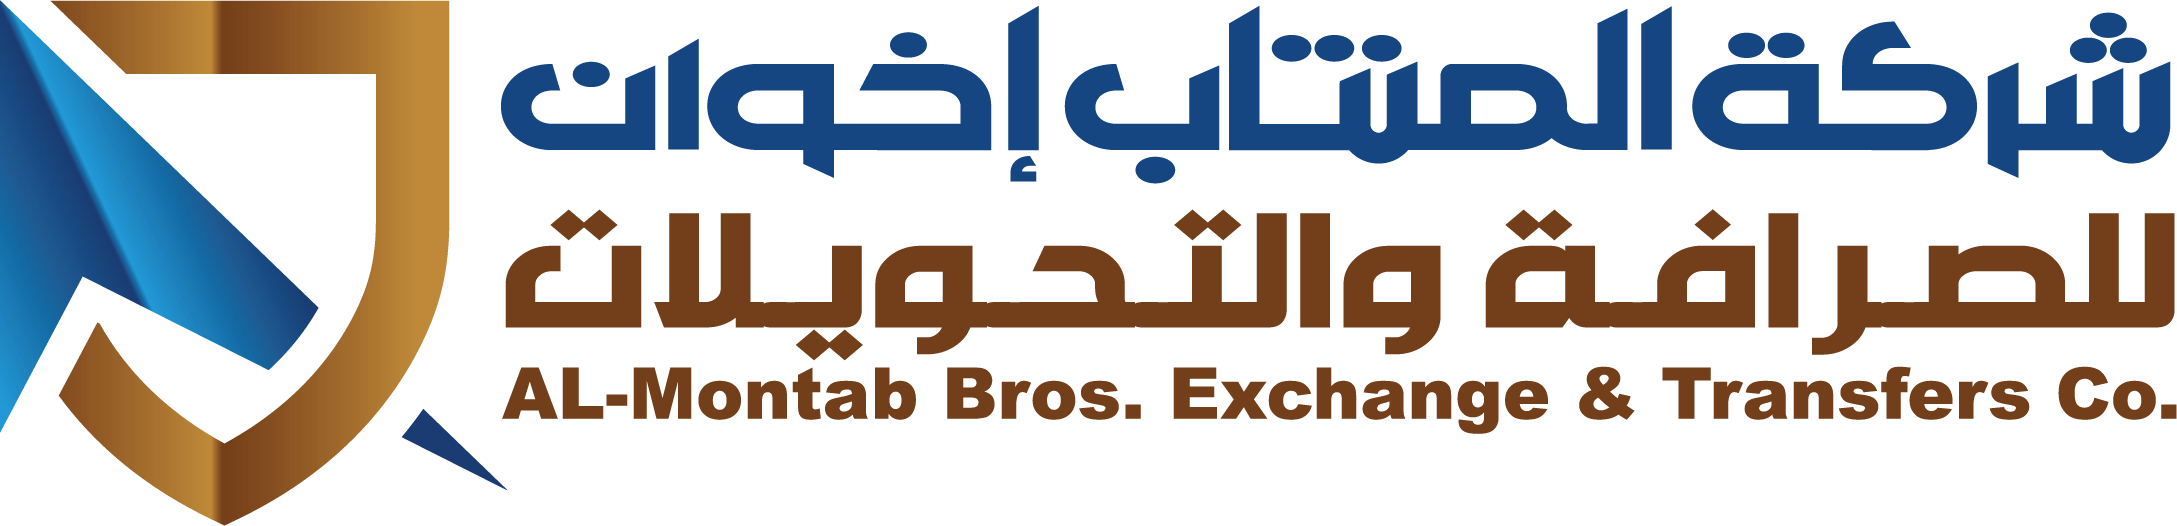 AL-Montab Bros For Extchange And Transfers Co